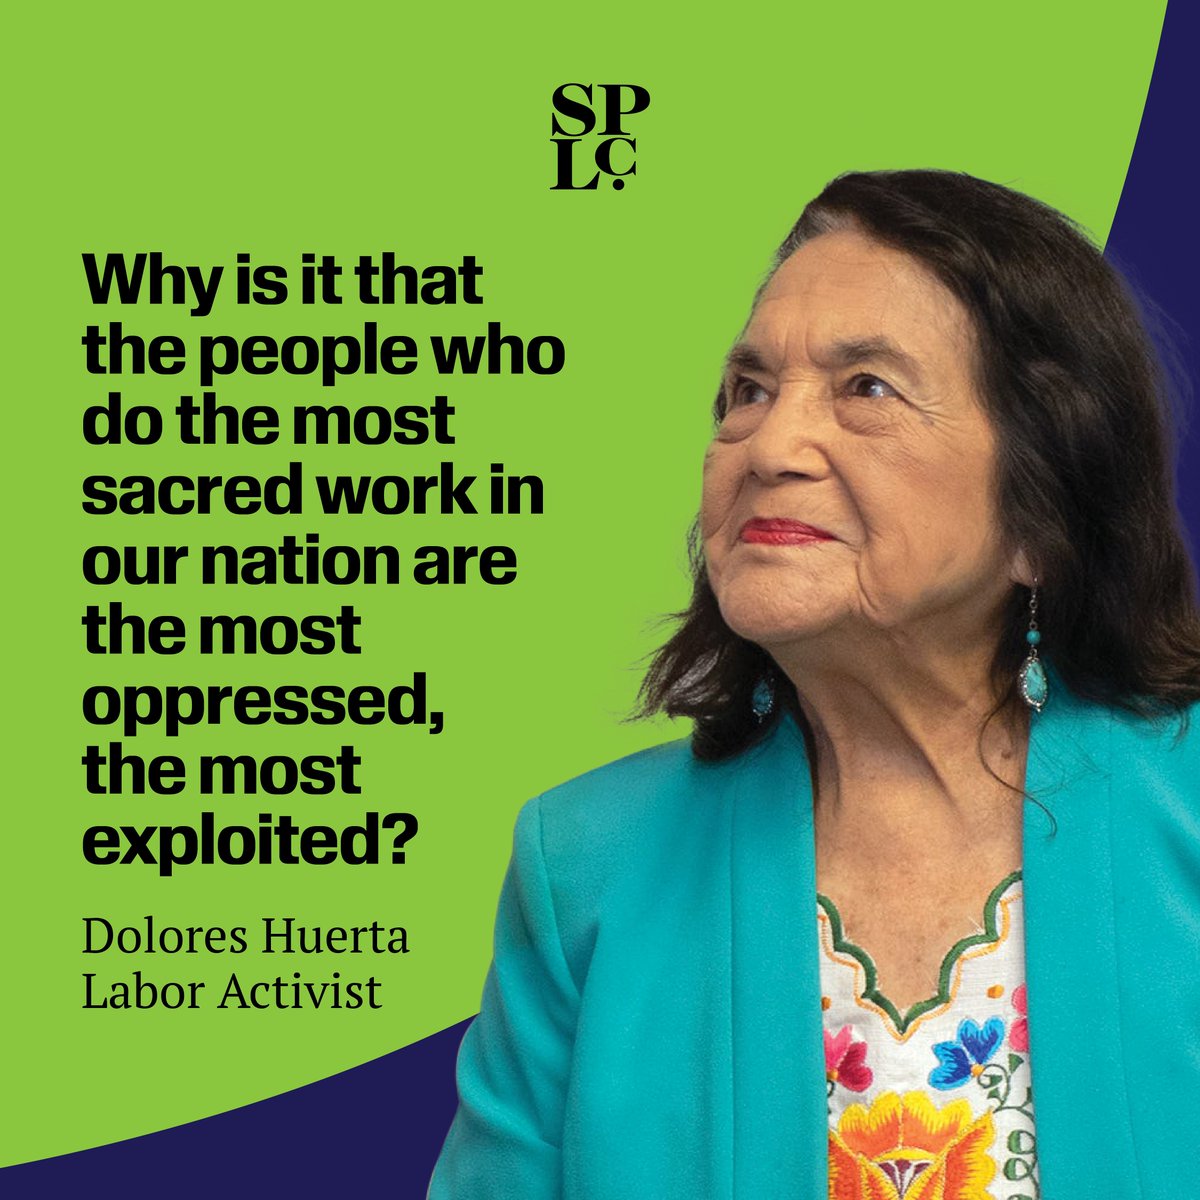 #OTD, labor leader, civil rights activist and co-founder of the National Farmworkers Association, Dolores Huerta was born. She continues to develop leaders and advocate for the working poor, women and children. Happy Birthday, Ms. Huerta! #TheMarchContinues